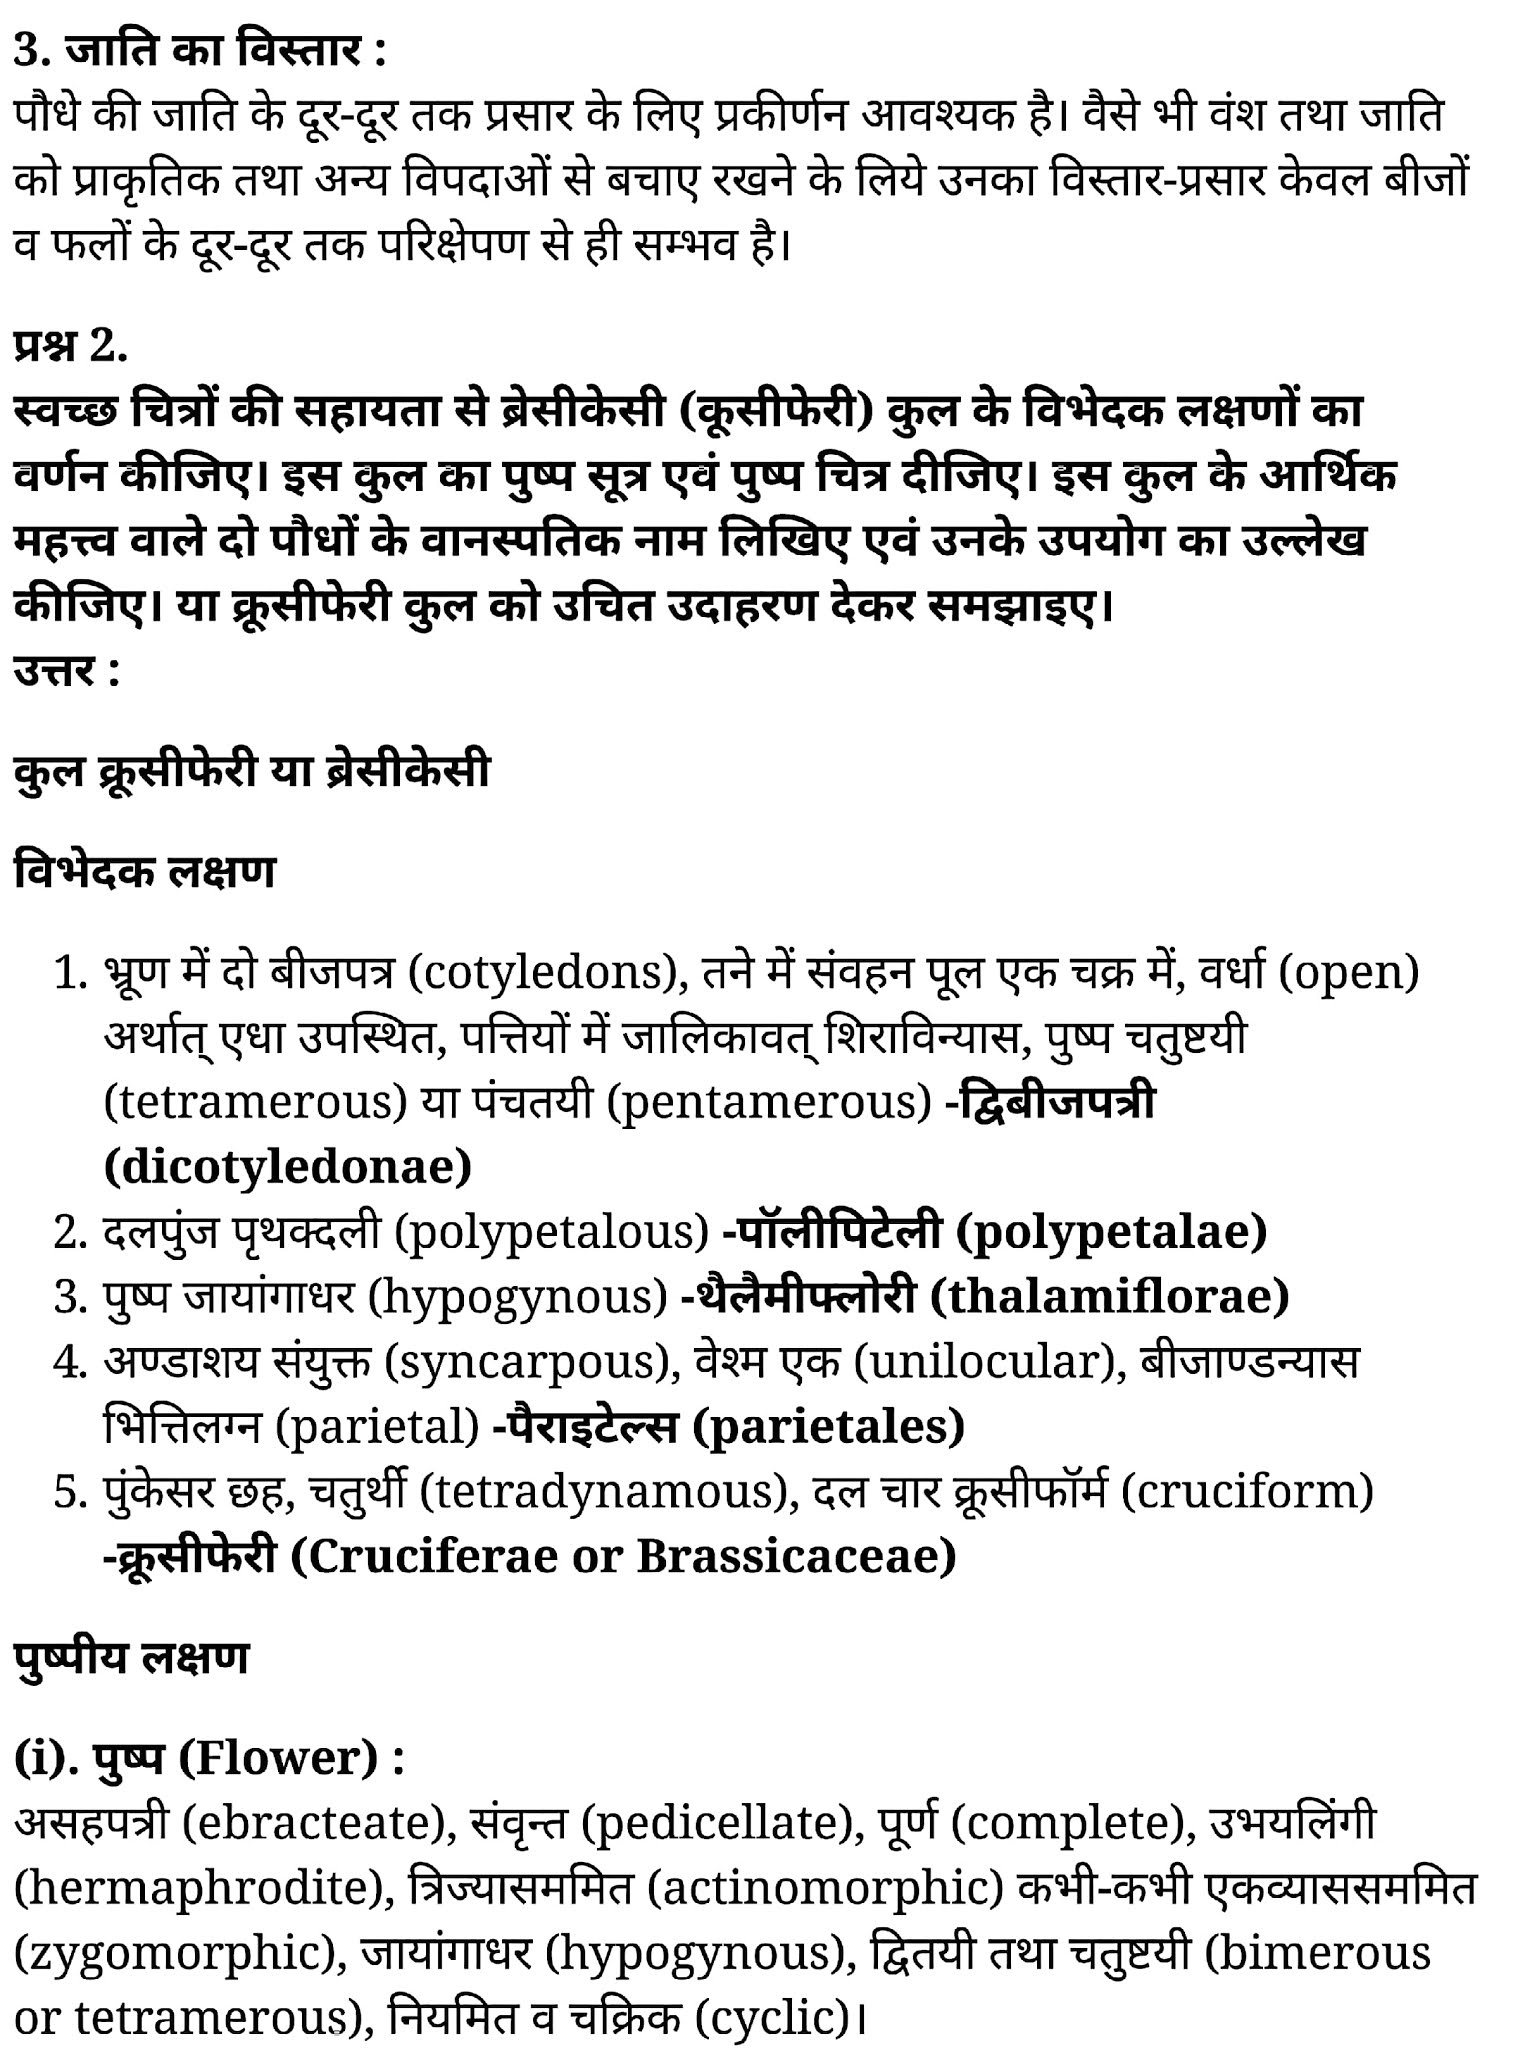 class 11 biology chapter 5 notes in hindi 33